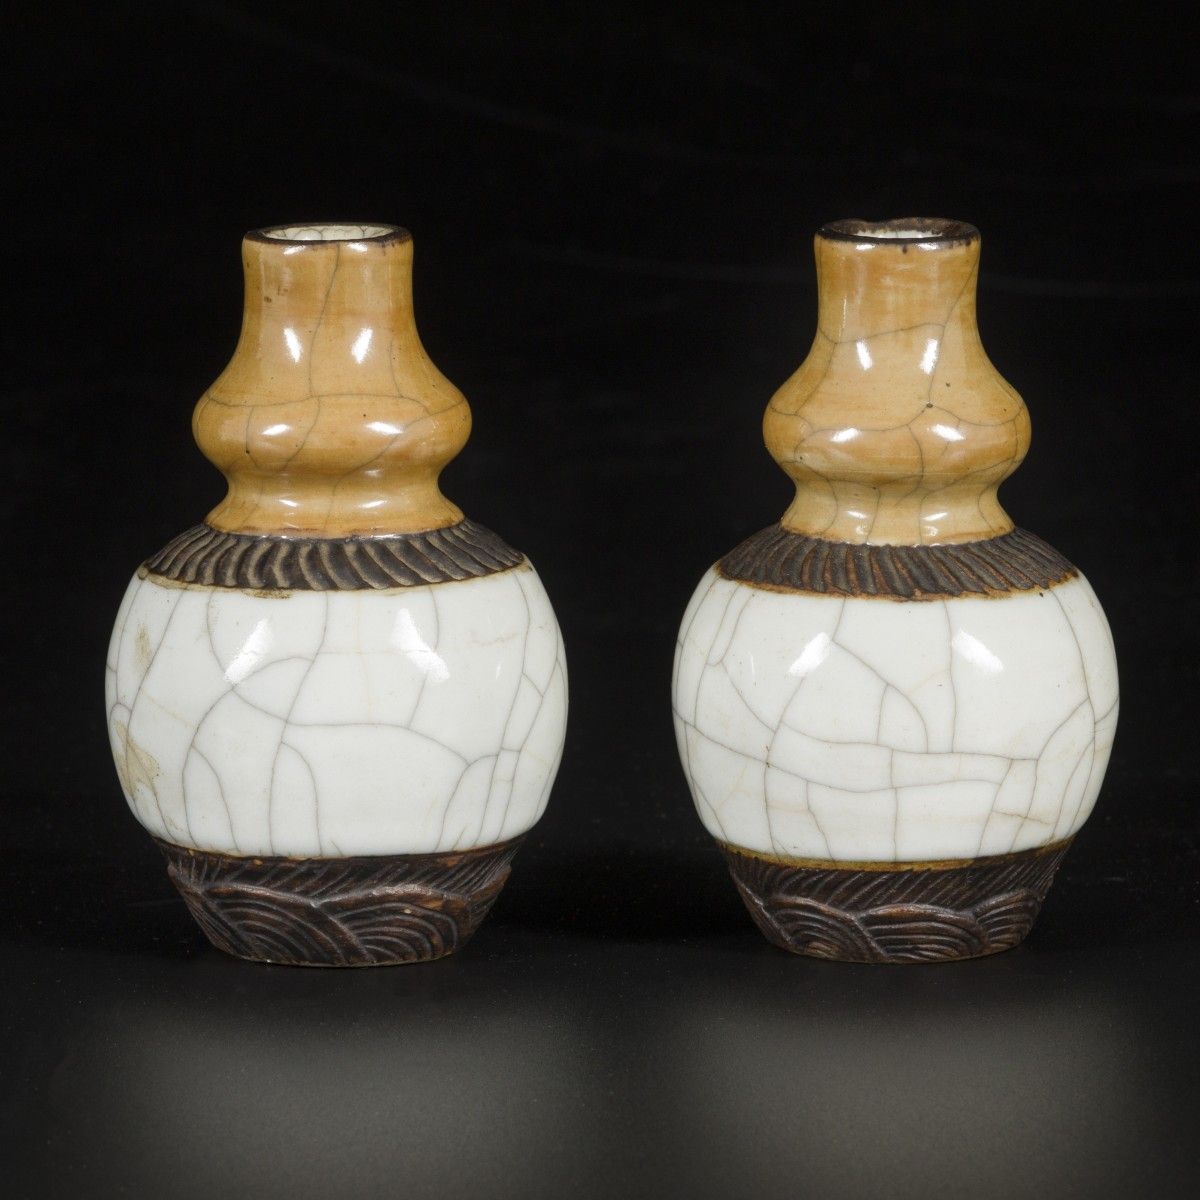 A set of (2) vases in Nanking earthenware, China, 19th century. Dim.13 x 8 cm.估计&hellip;